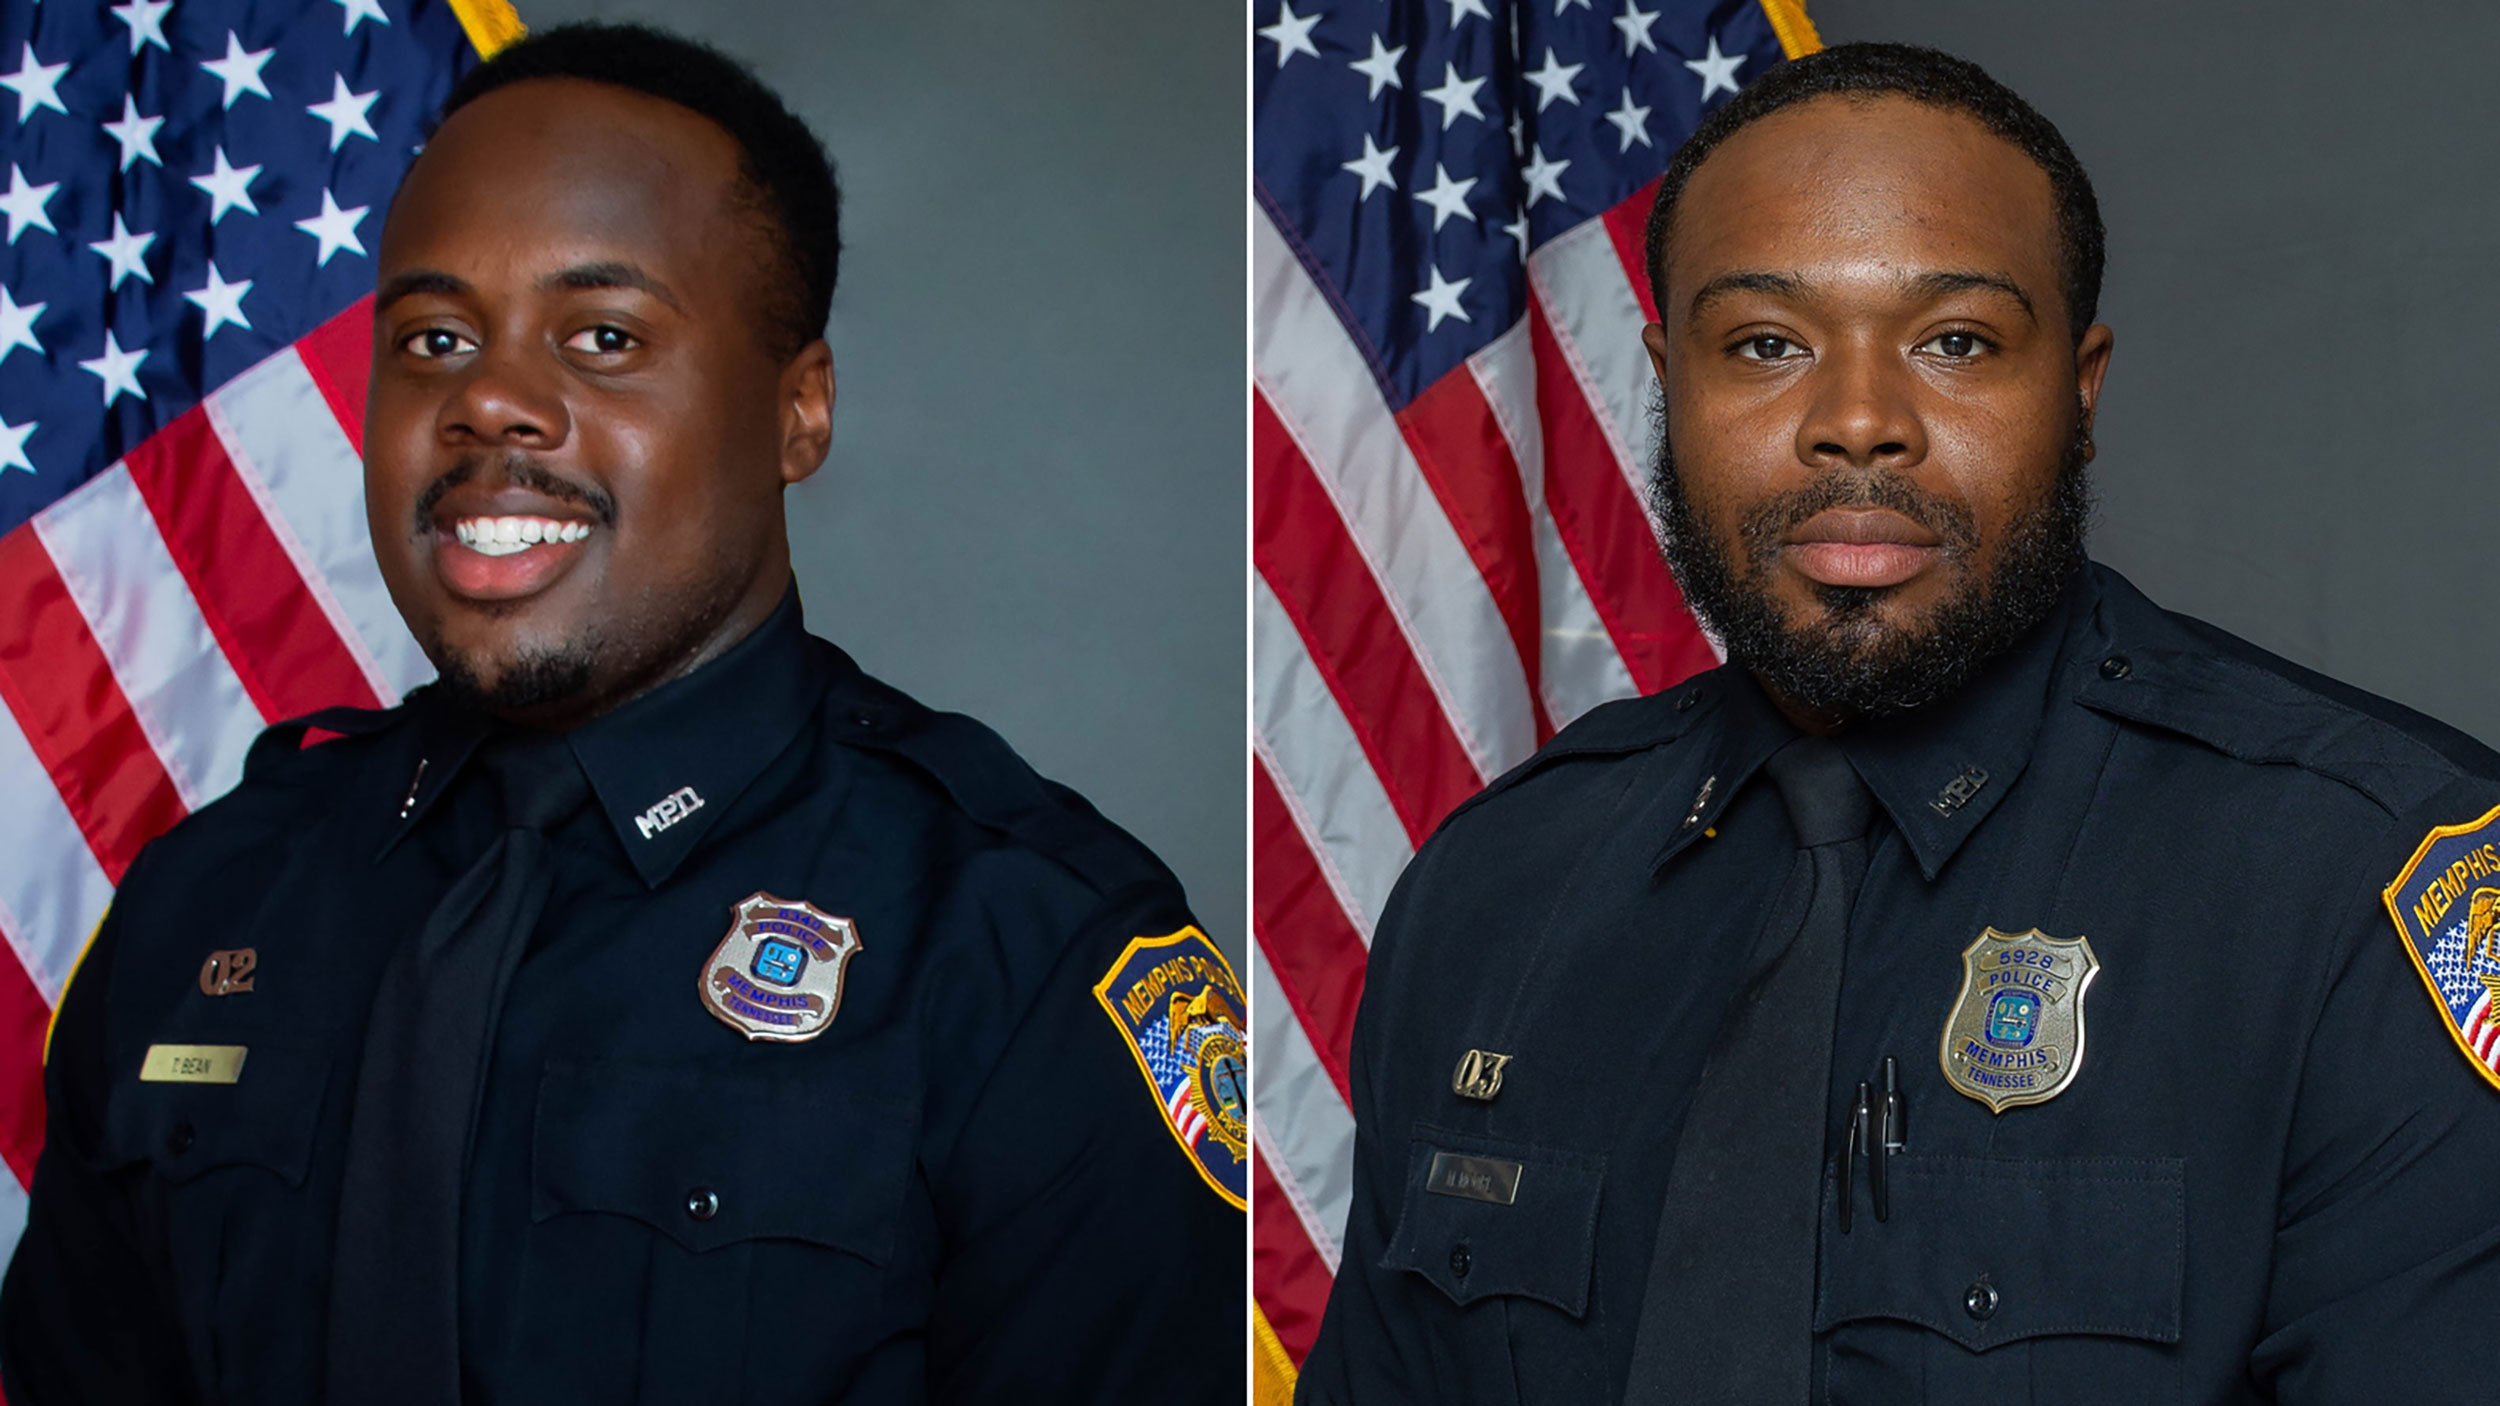 Former Memphis police officers, Tadarrius Bean and Demetrius Haley